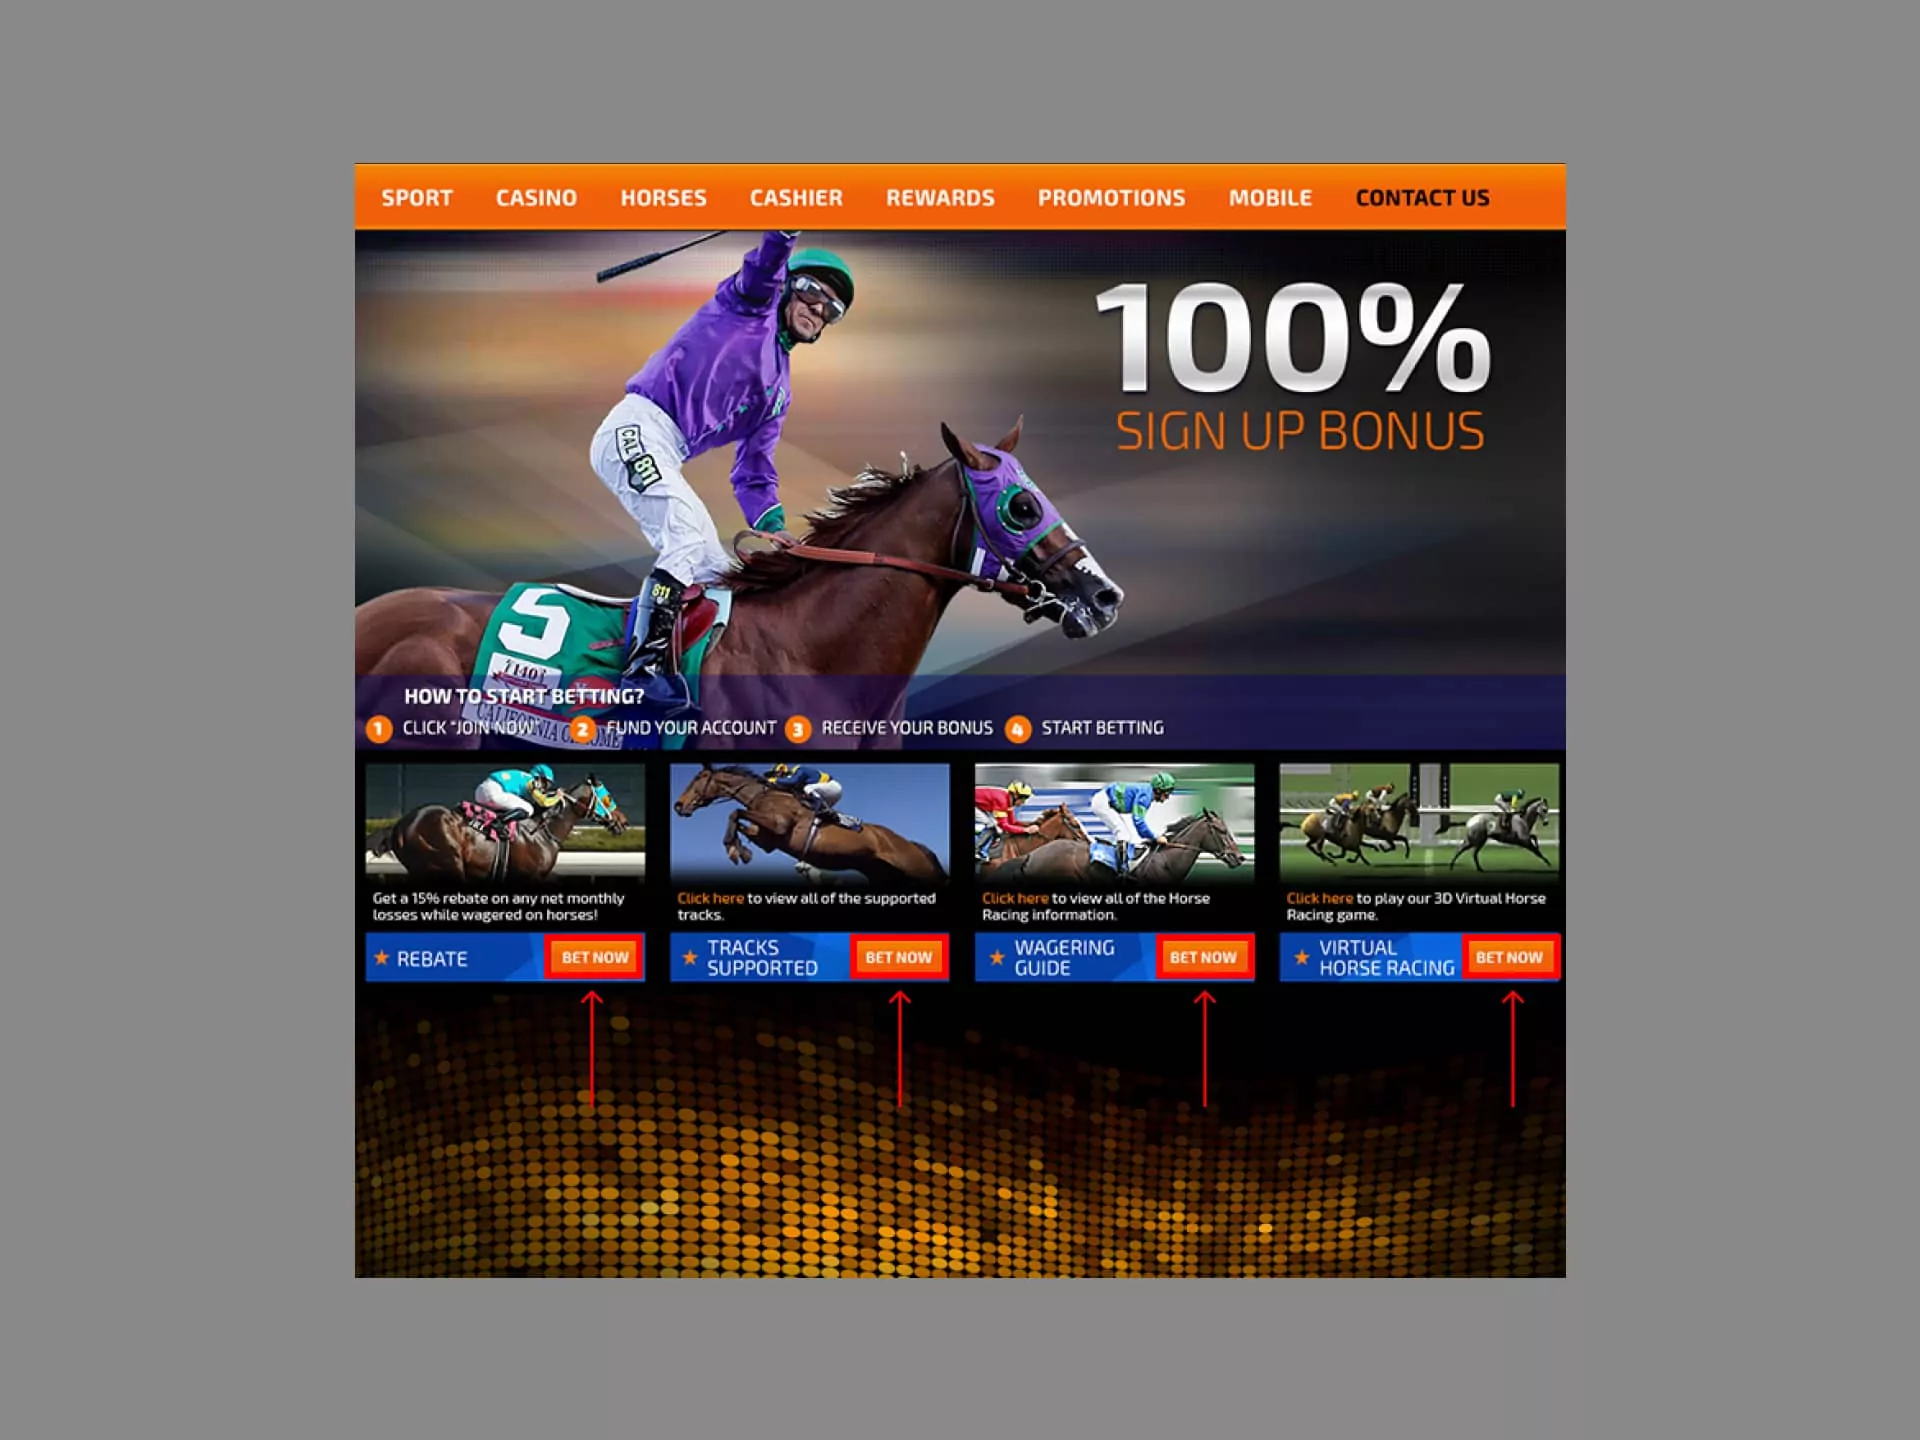 How place a bet at horse racing betting site.